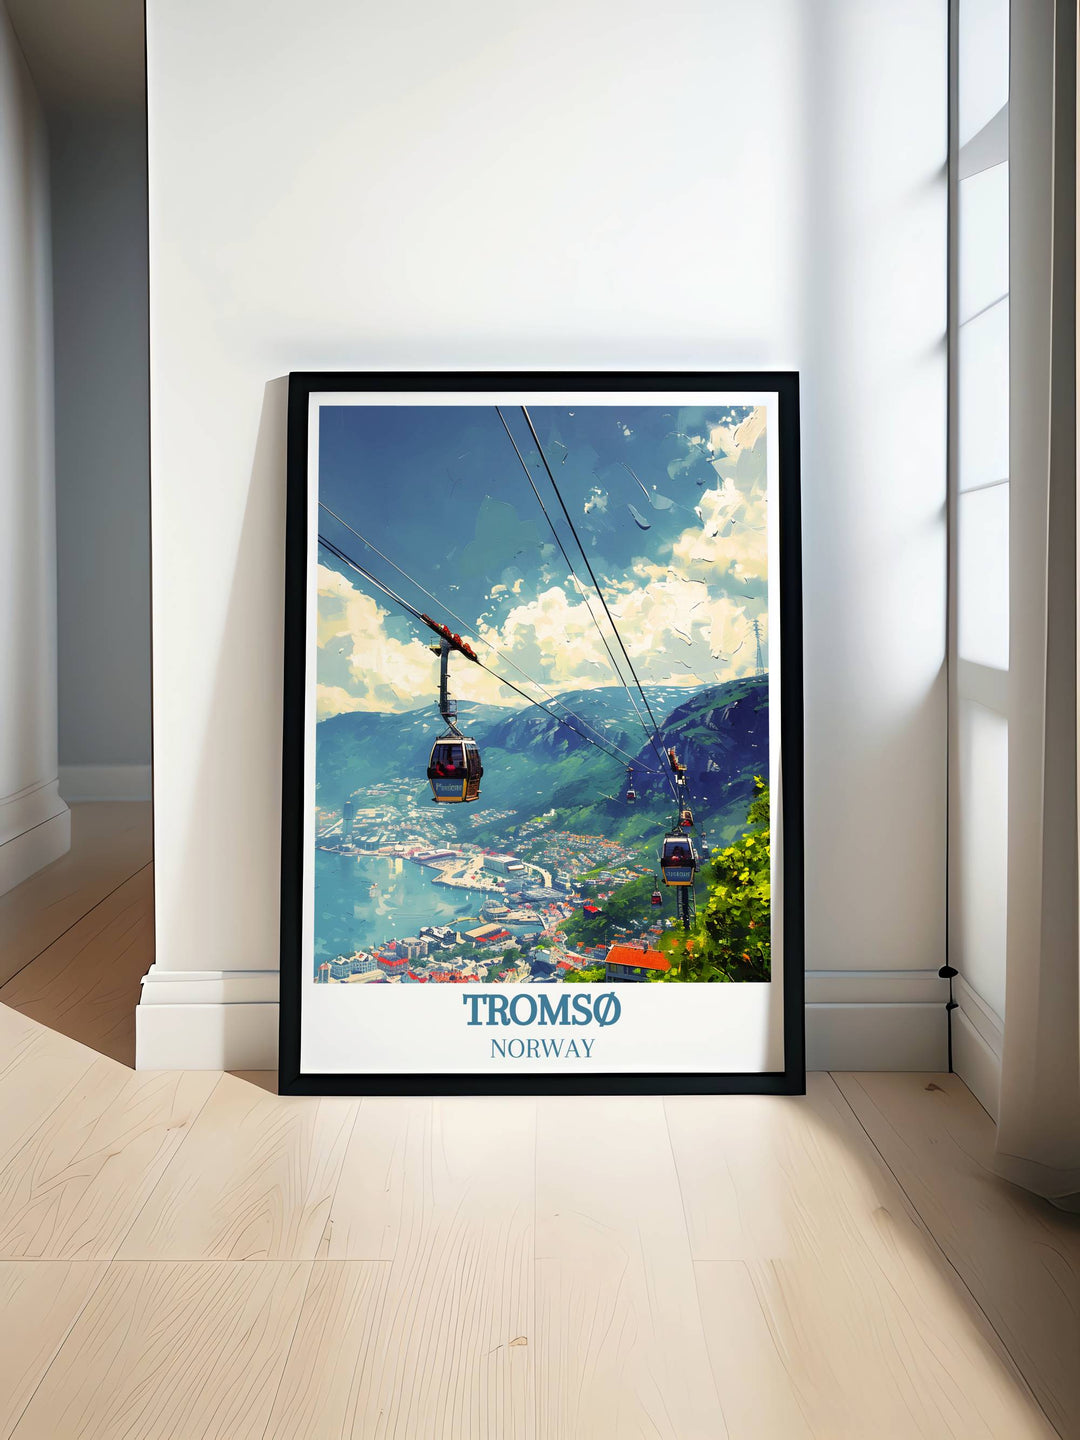 Tromso Norway fine art print featuring the iconic Fjellheisen cable car, capturing the stunning Arctic landscape with snow capped mountains and pristine wilderness, perfect for adding a touch of Nordic charm to your home.